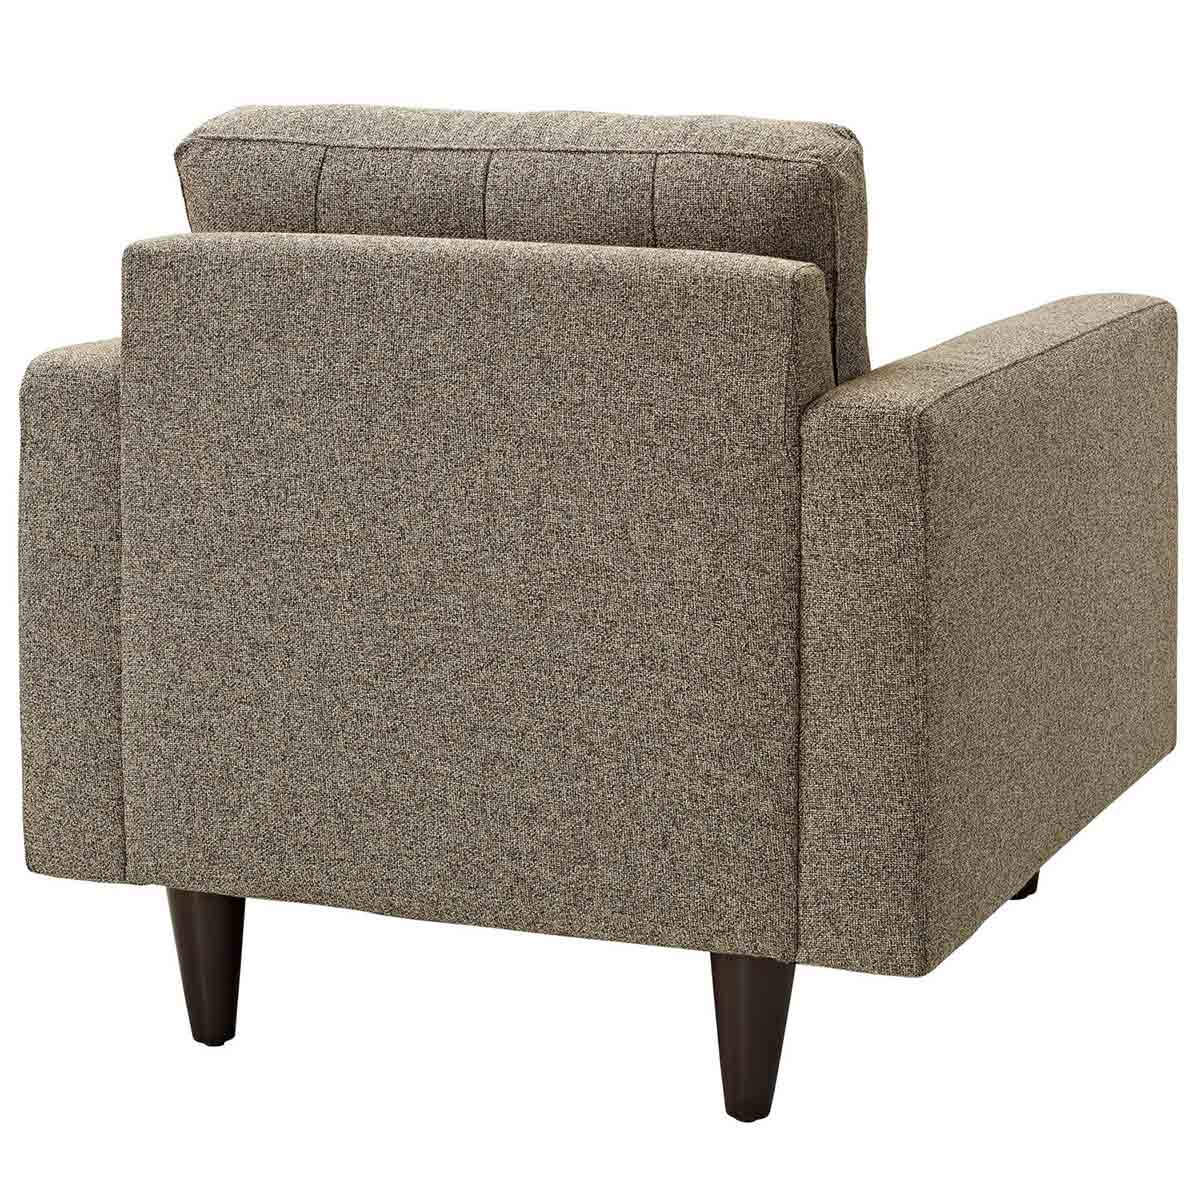 Modway Empress Armchair Upholstered Set of 2 - Oatmeal